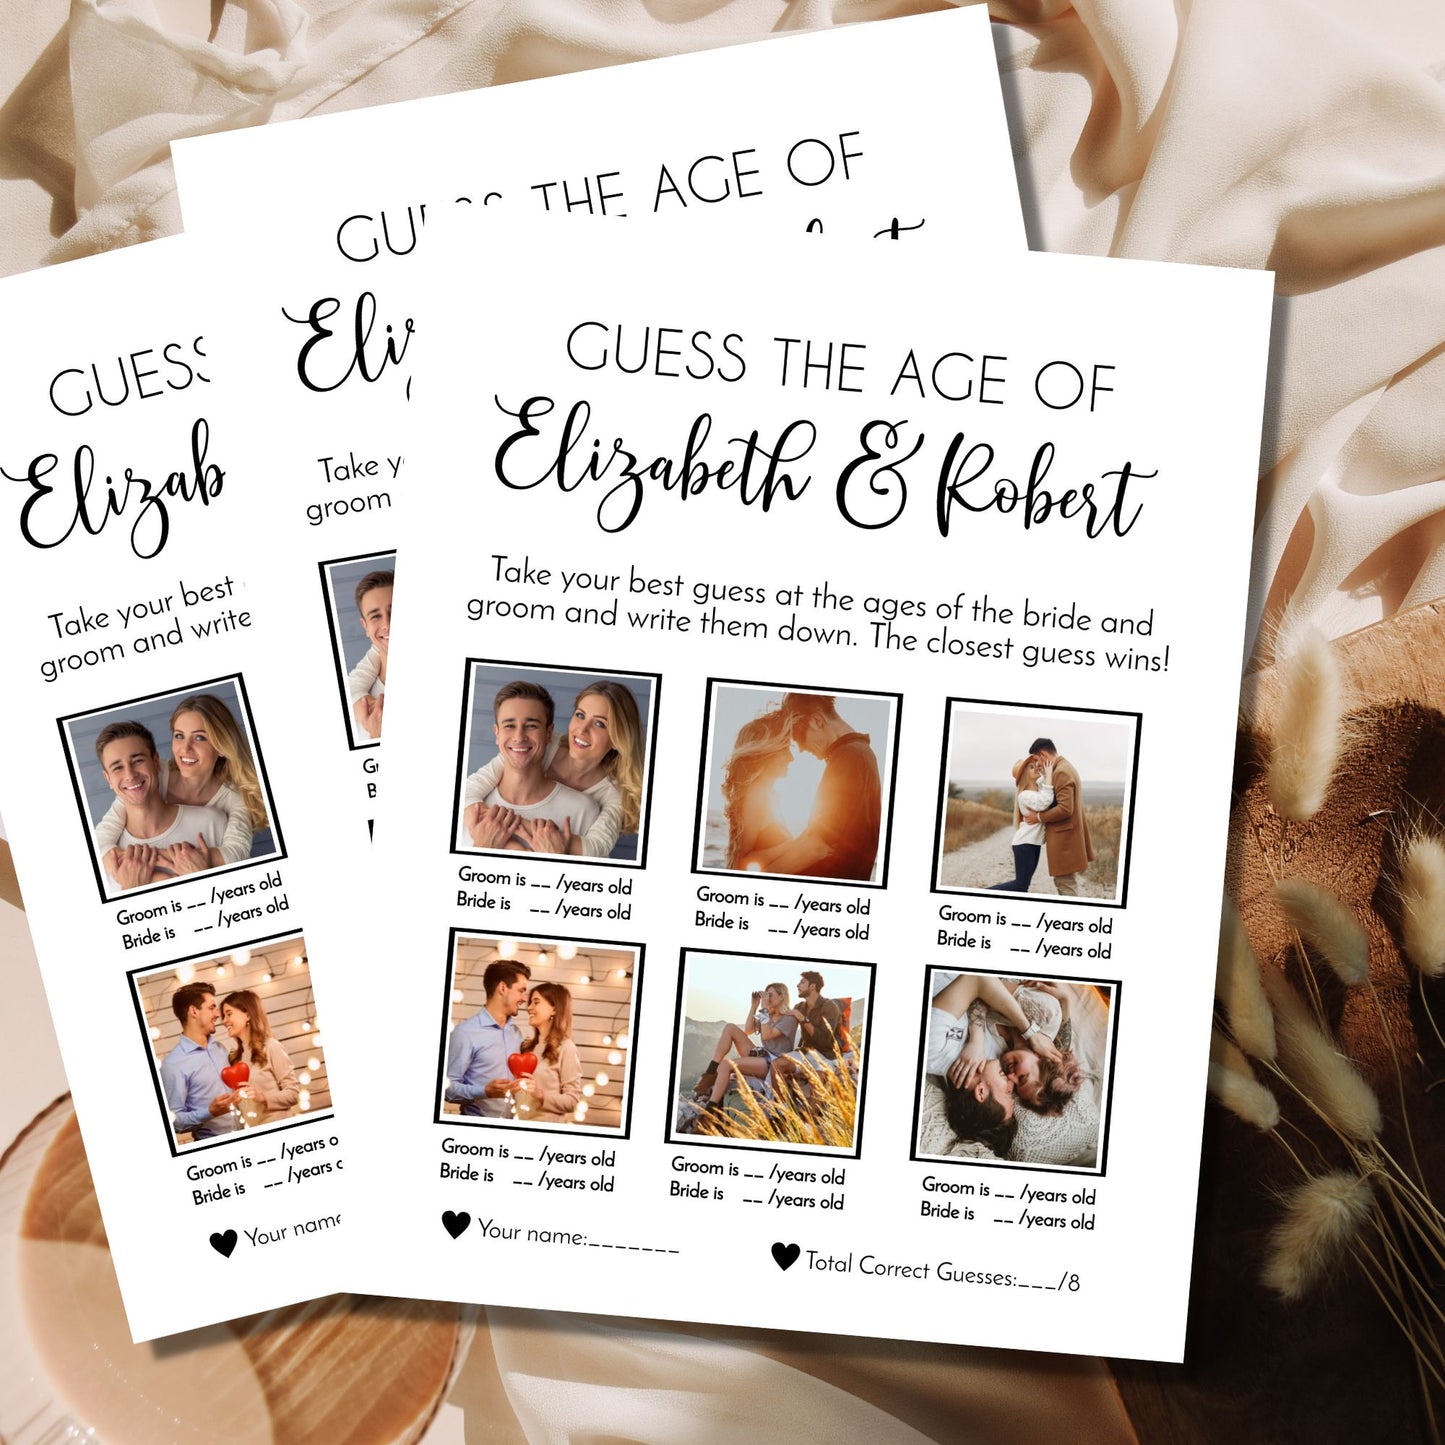 Guess the Age of the Bride and Groom Game Template